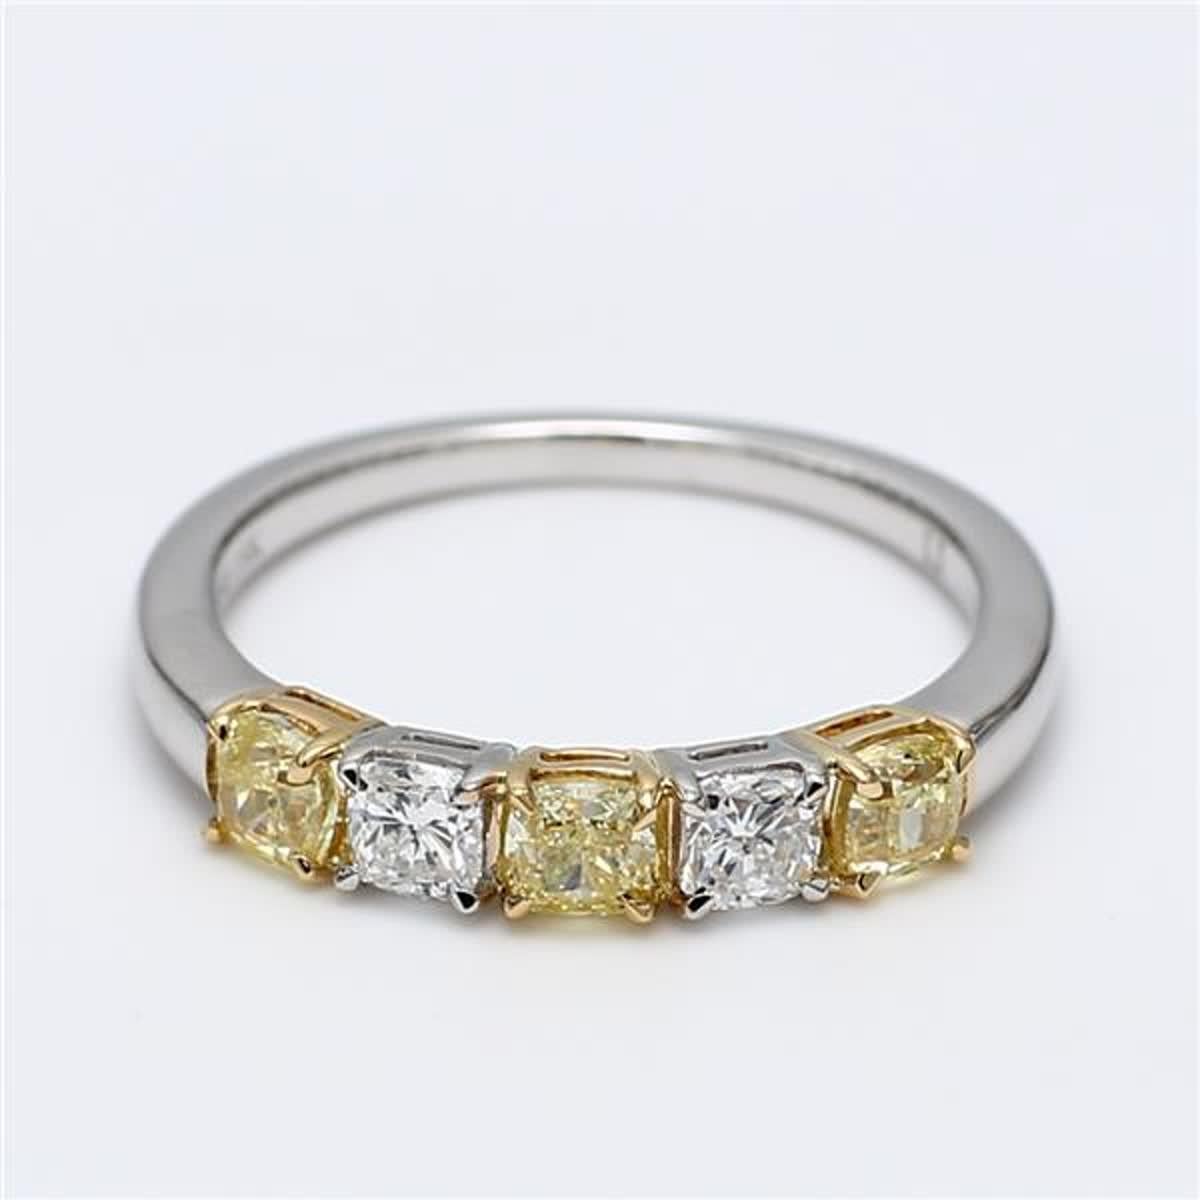 RareGemWorld's classic diamond band. Mounted in a beautiful 18K Yellow and White Gold setting with natural cushion cut yellow diamonds complimented by natural cushion cut white diamonds. This band is guaranteed to impress and enhance your personal